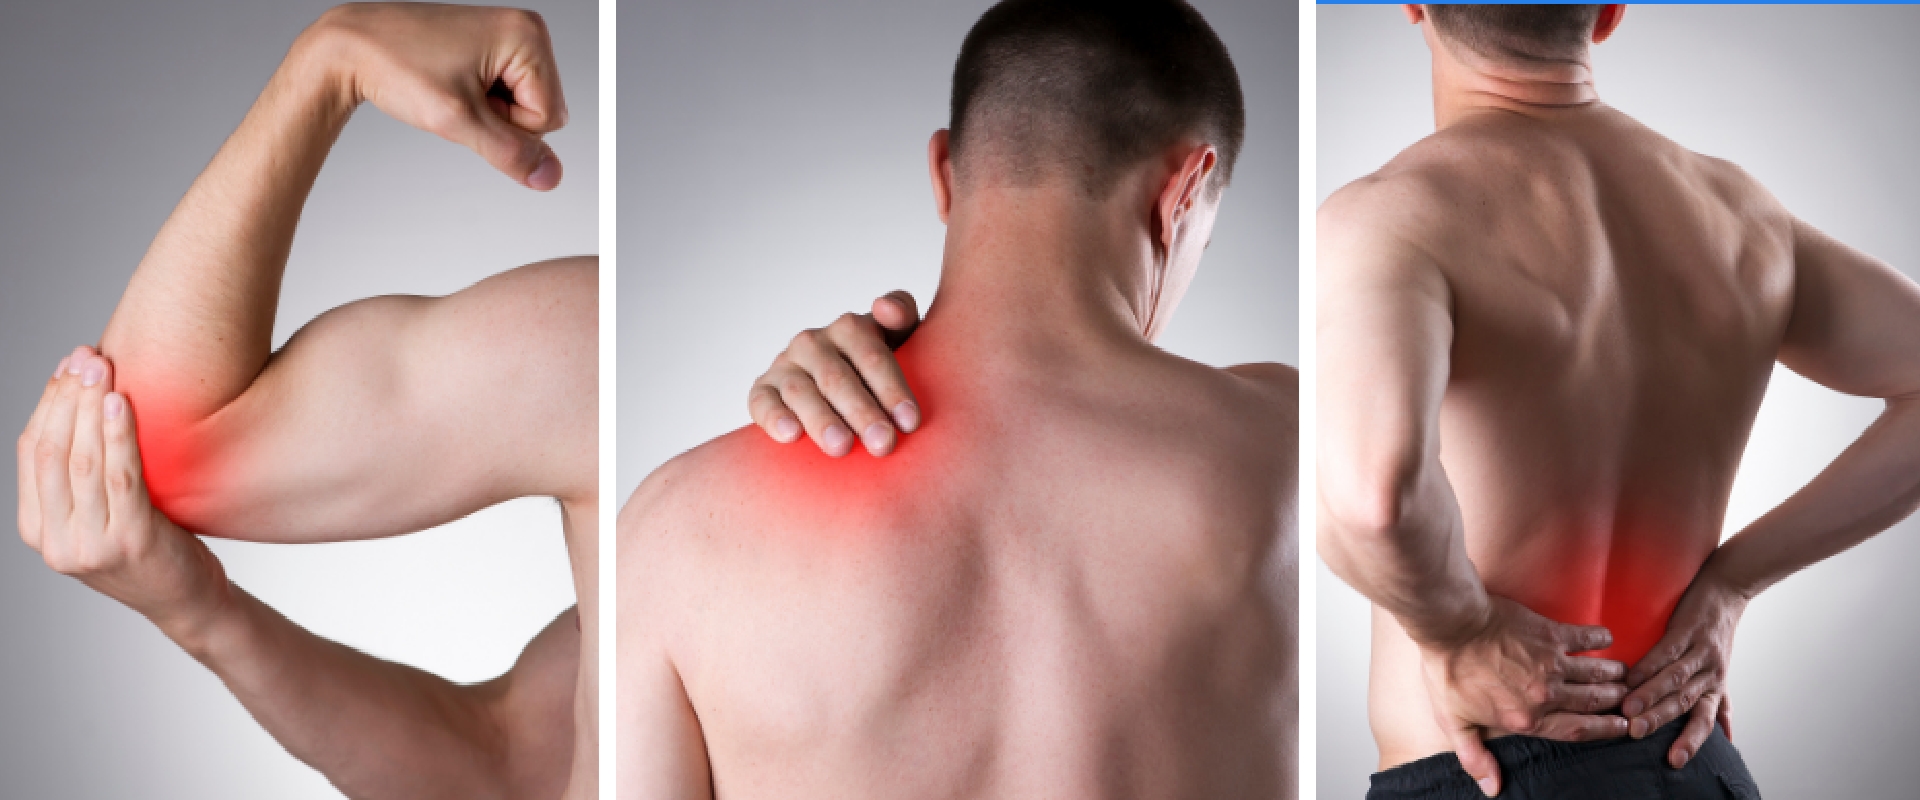 pain-point-images-banner-image-Rhea-gold-physiotherapy-calgary-ab